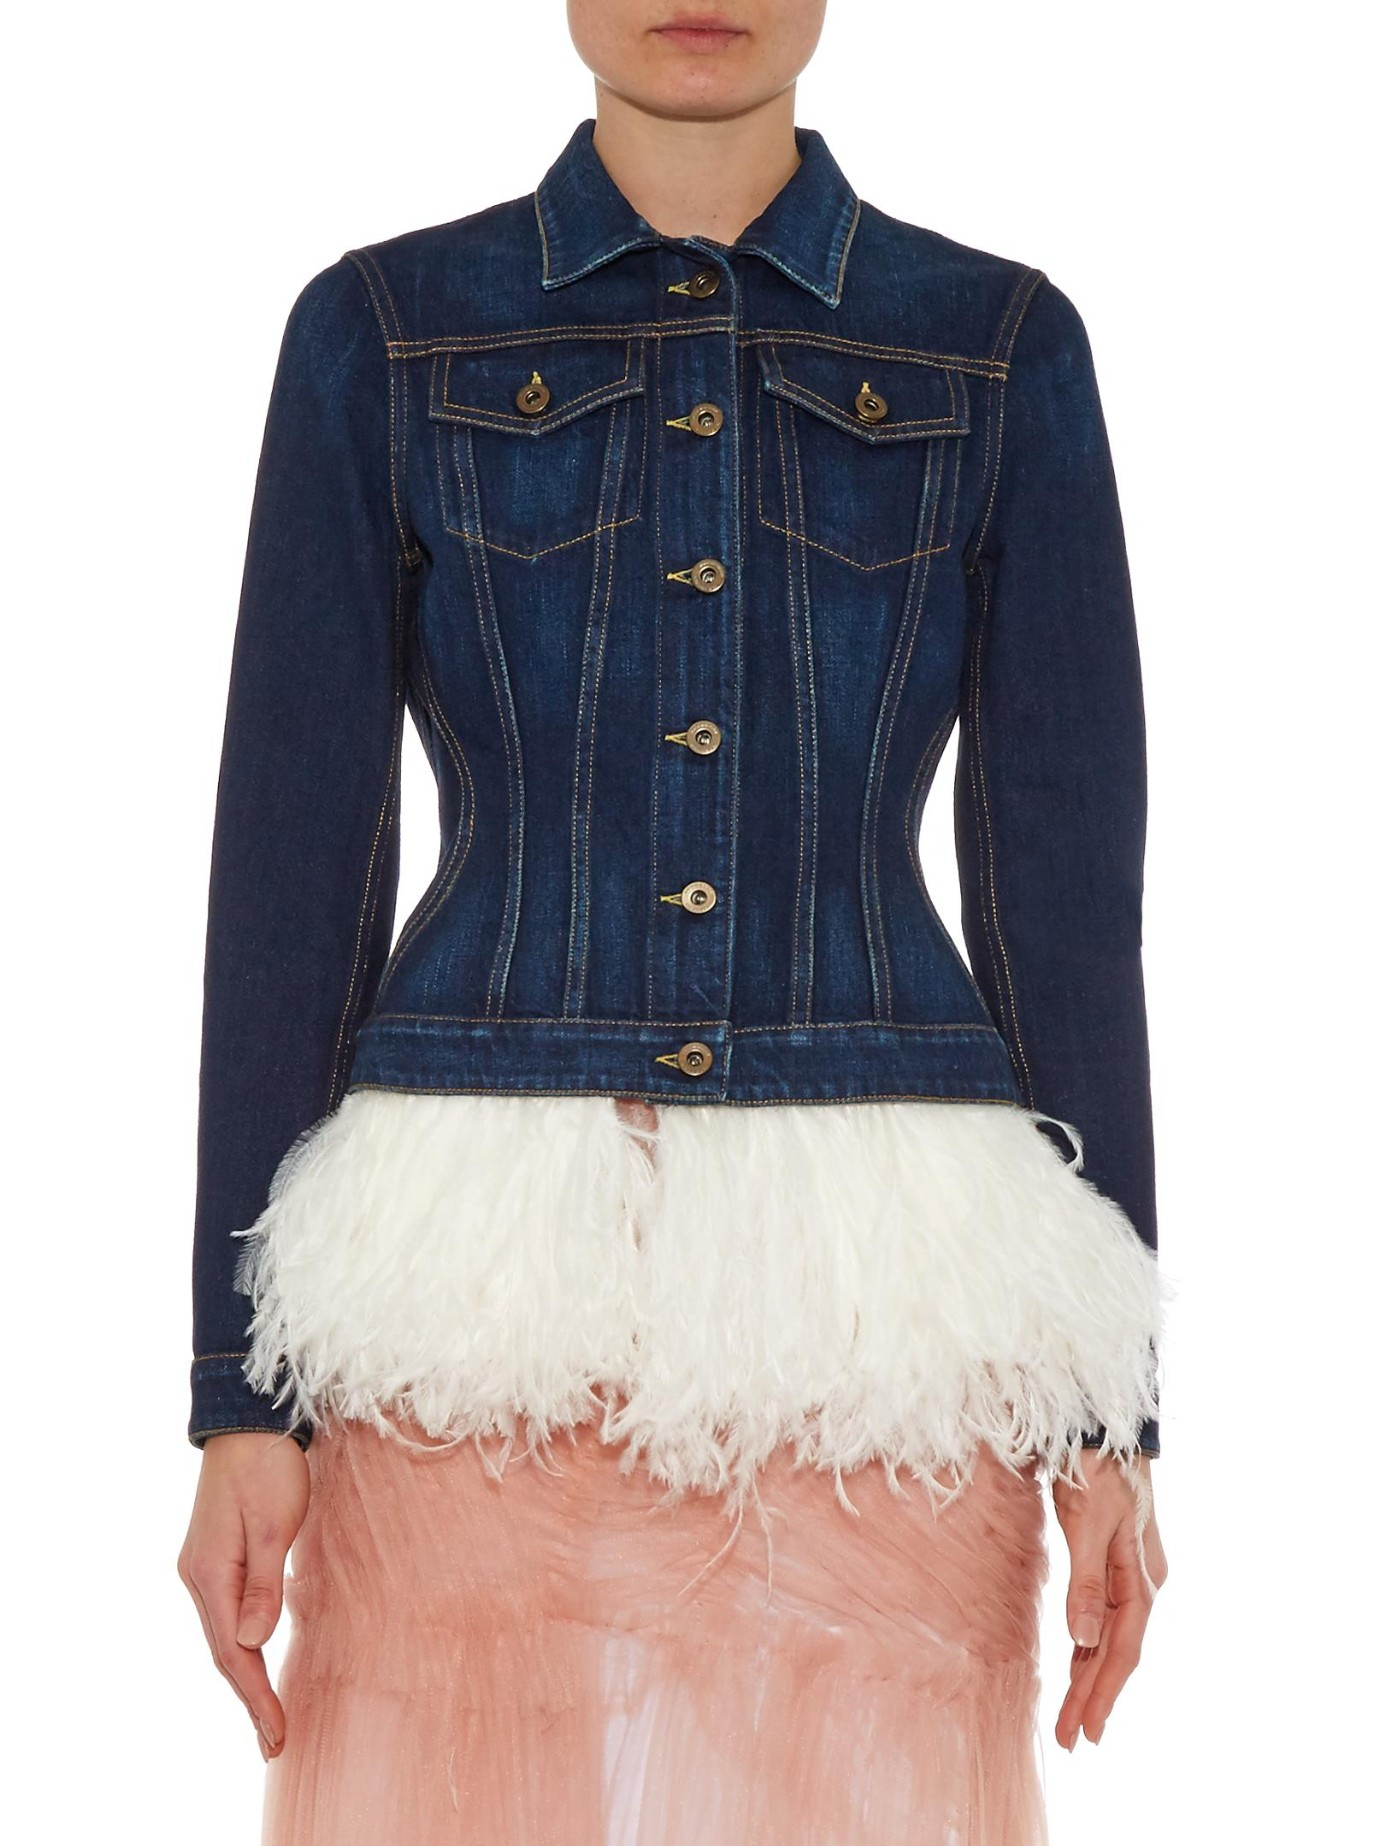 Lyst - Burberry Prorsum Feather-Embellished Denim Jacket in Blue